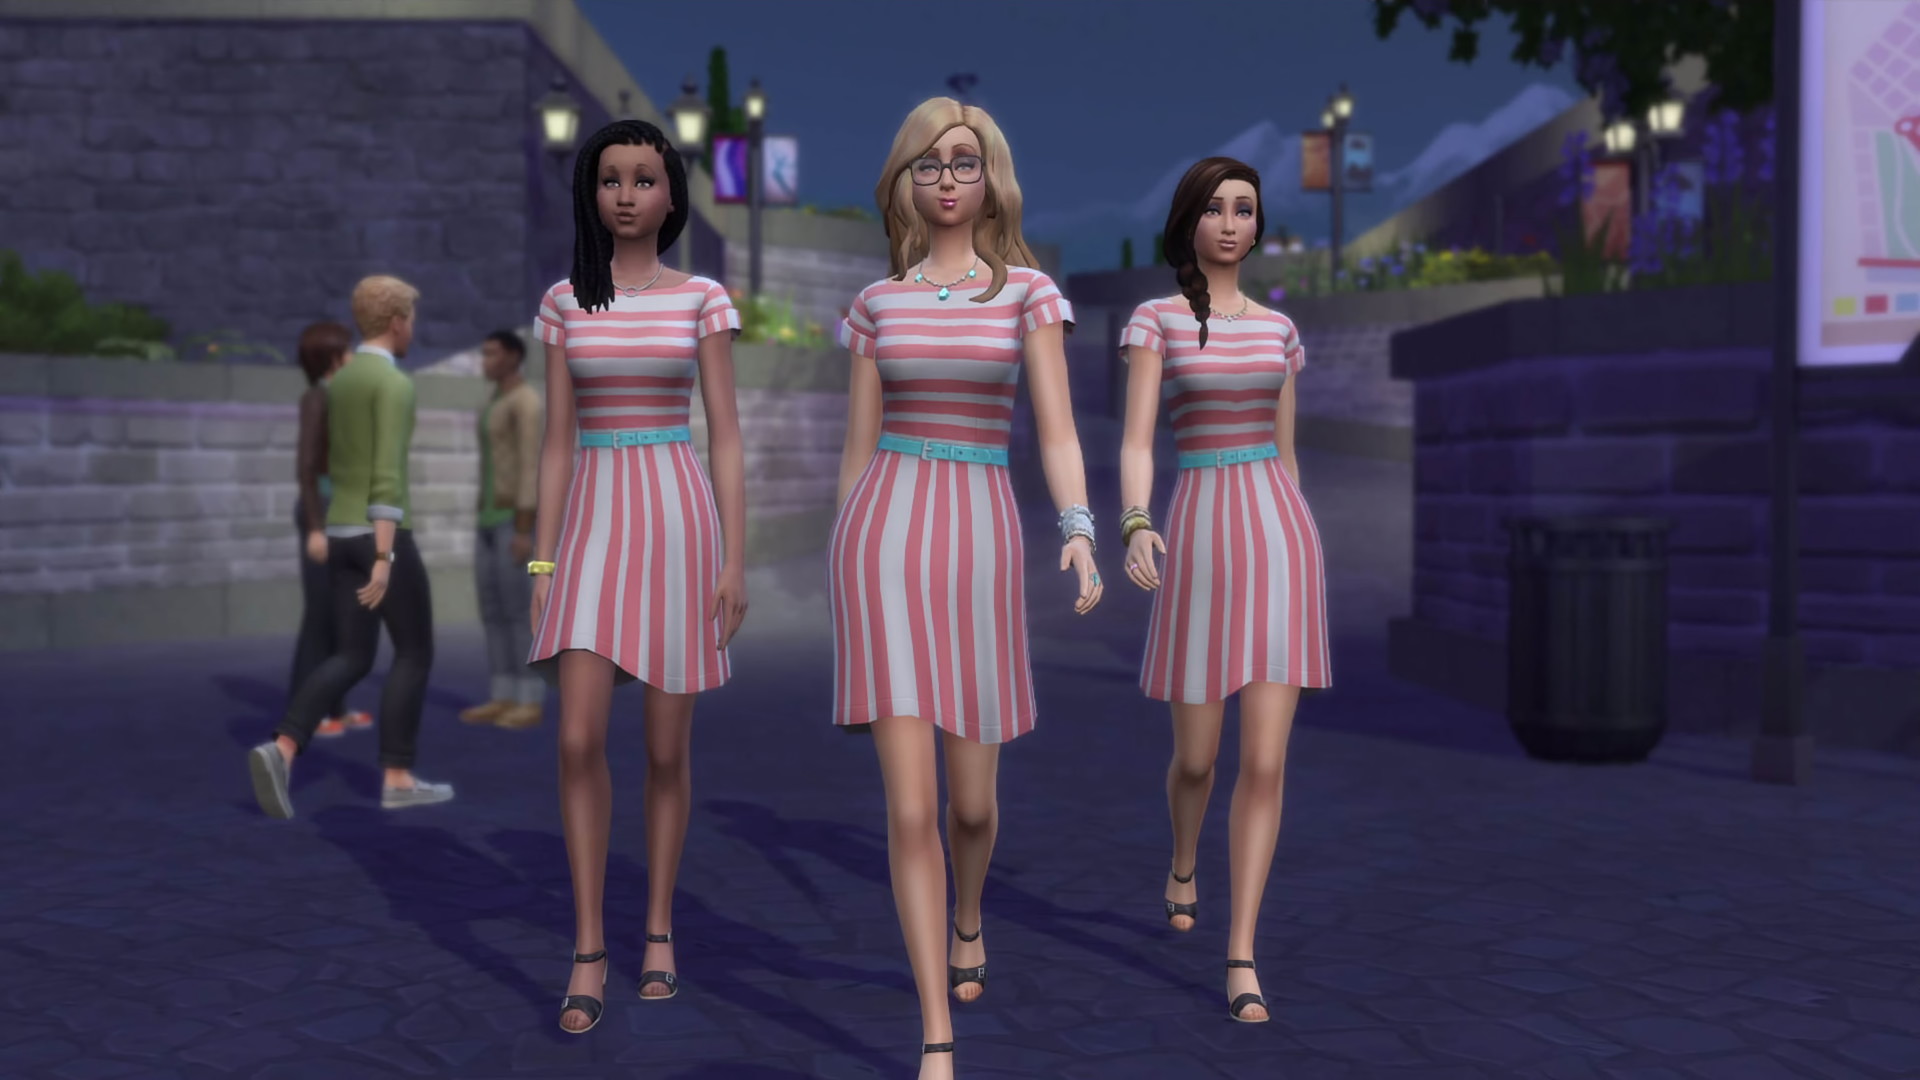 The Sims 4: Get Together - screenshot 17